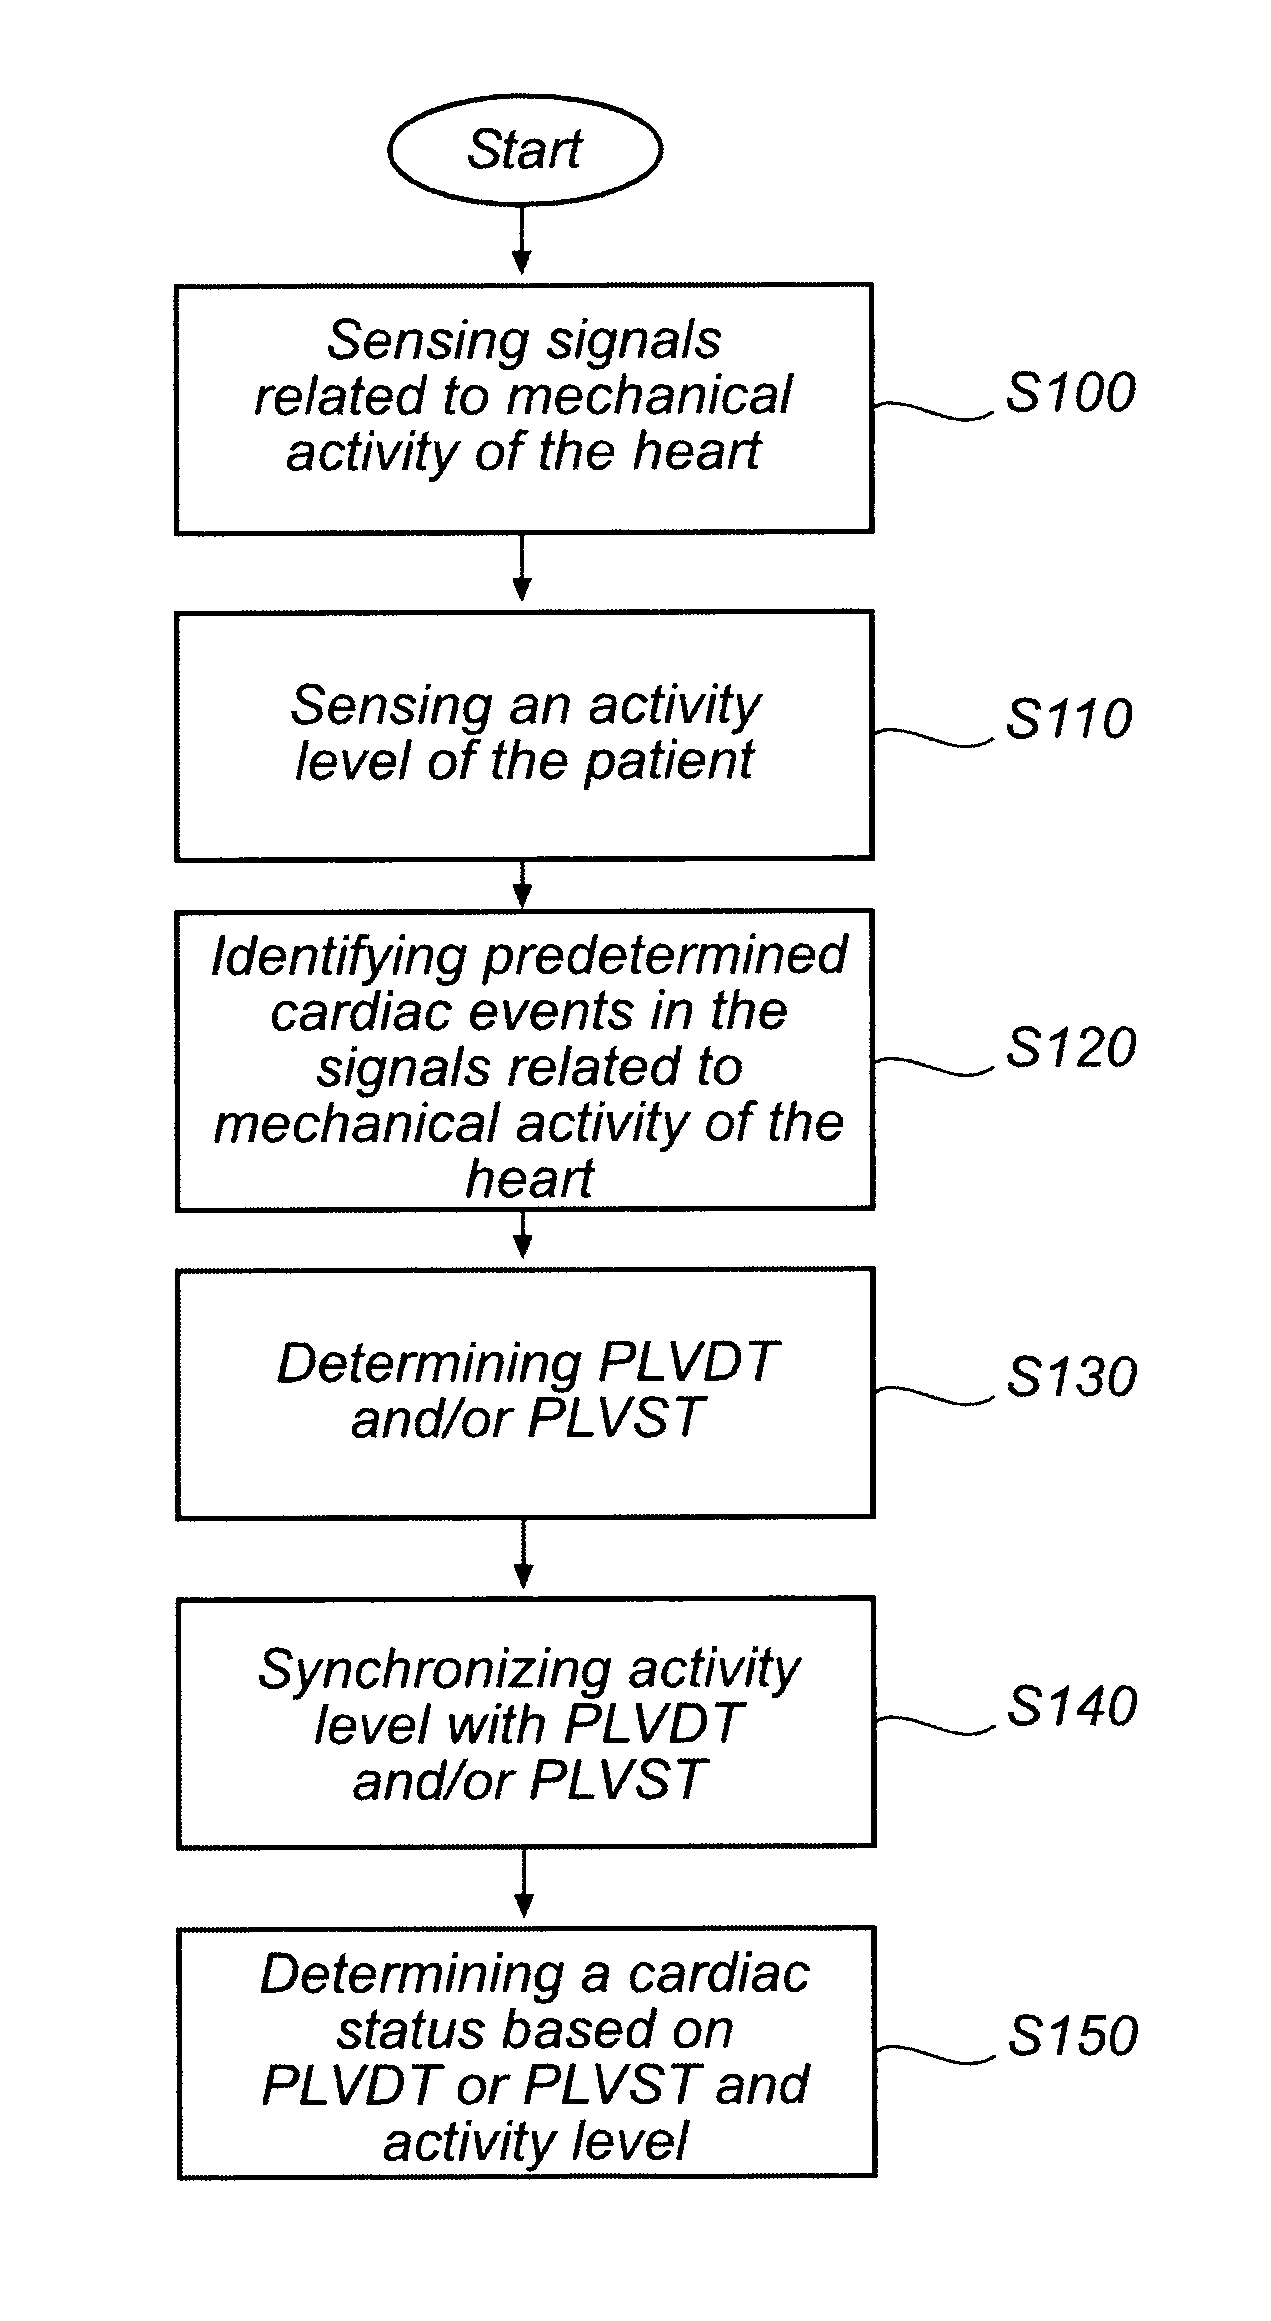 Devices and method for determining and monitoring a cardiac status of a patient by using PLVDT or PLVST parameters